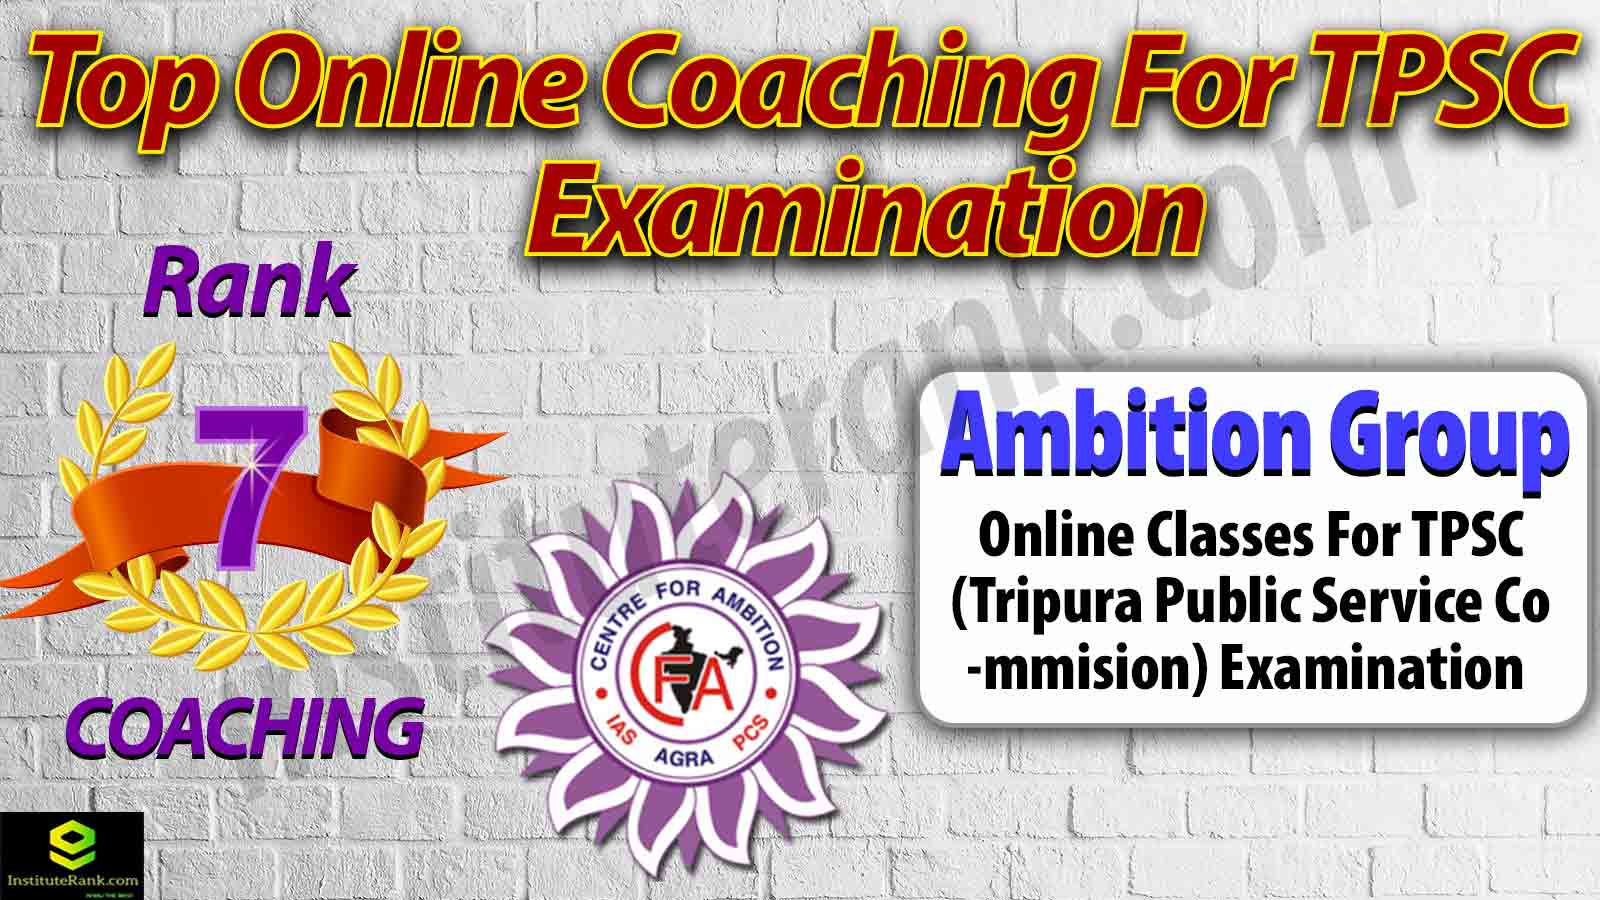 Top Online Coaching for TPSC